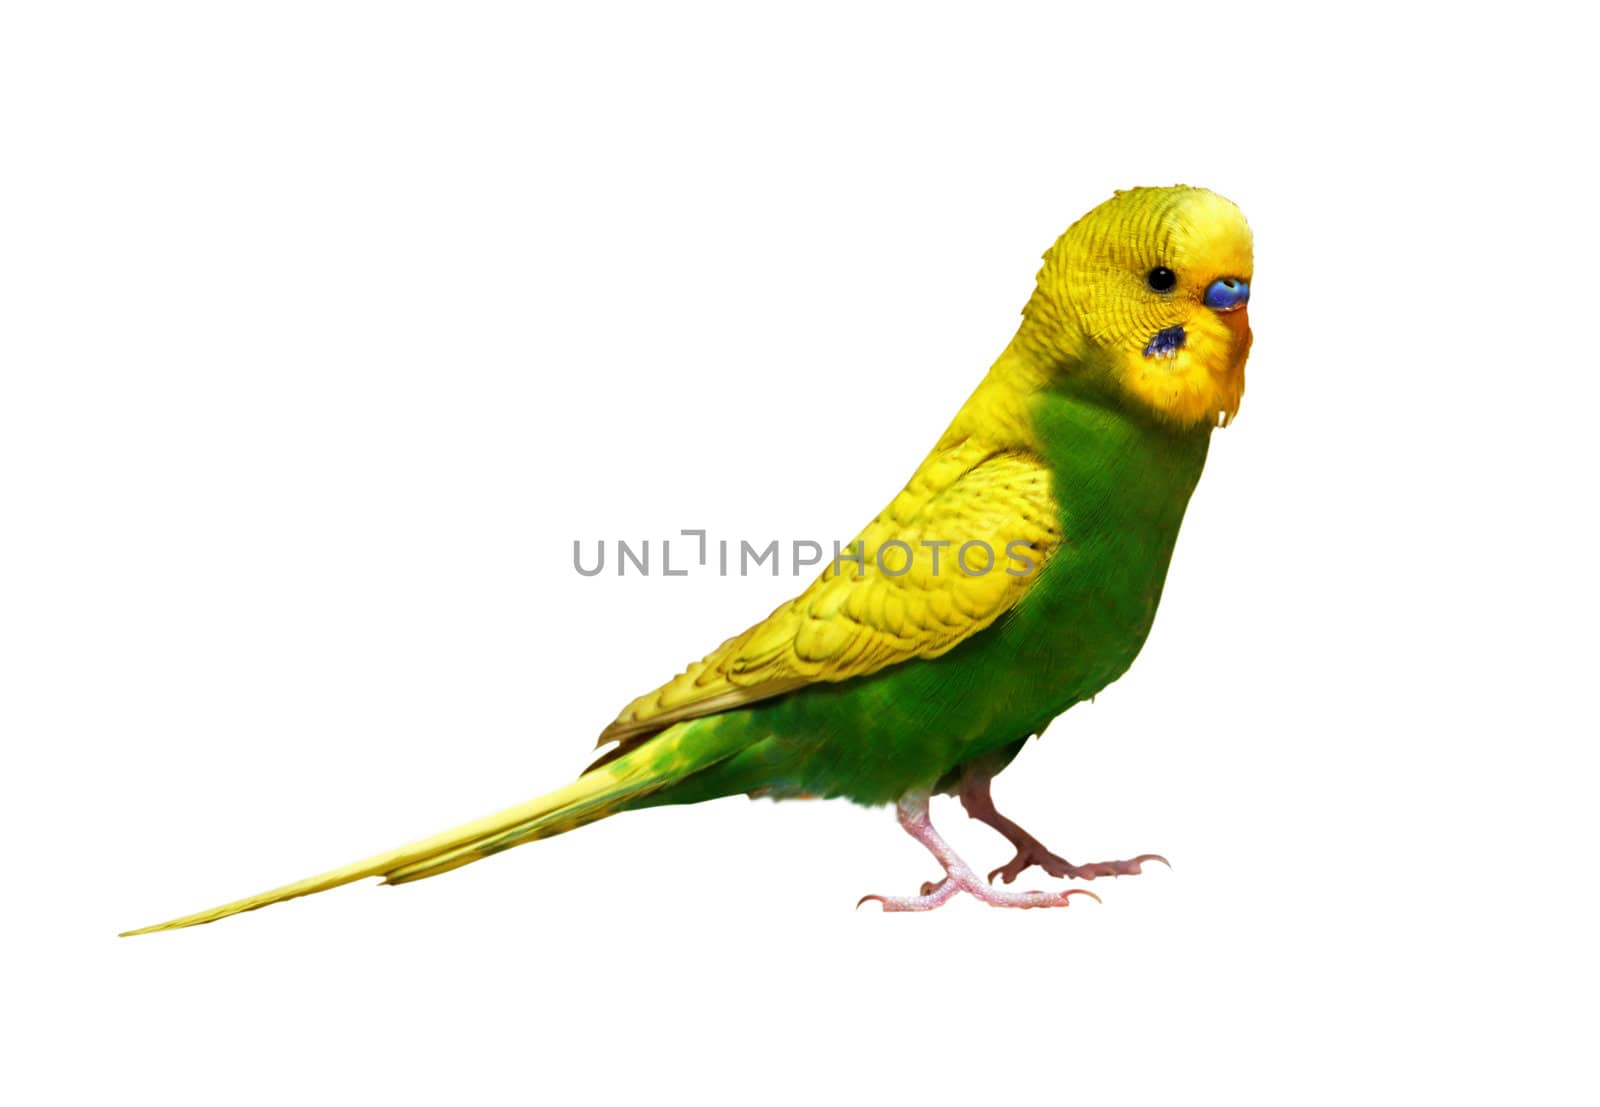 Yelow parrot on white background